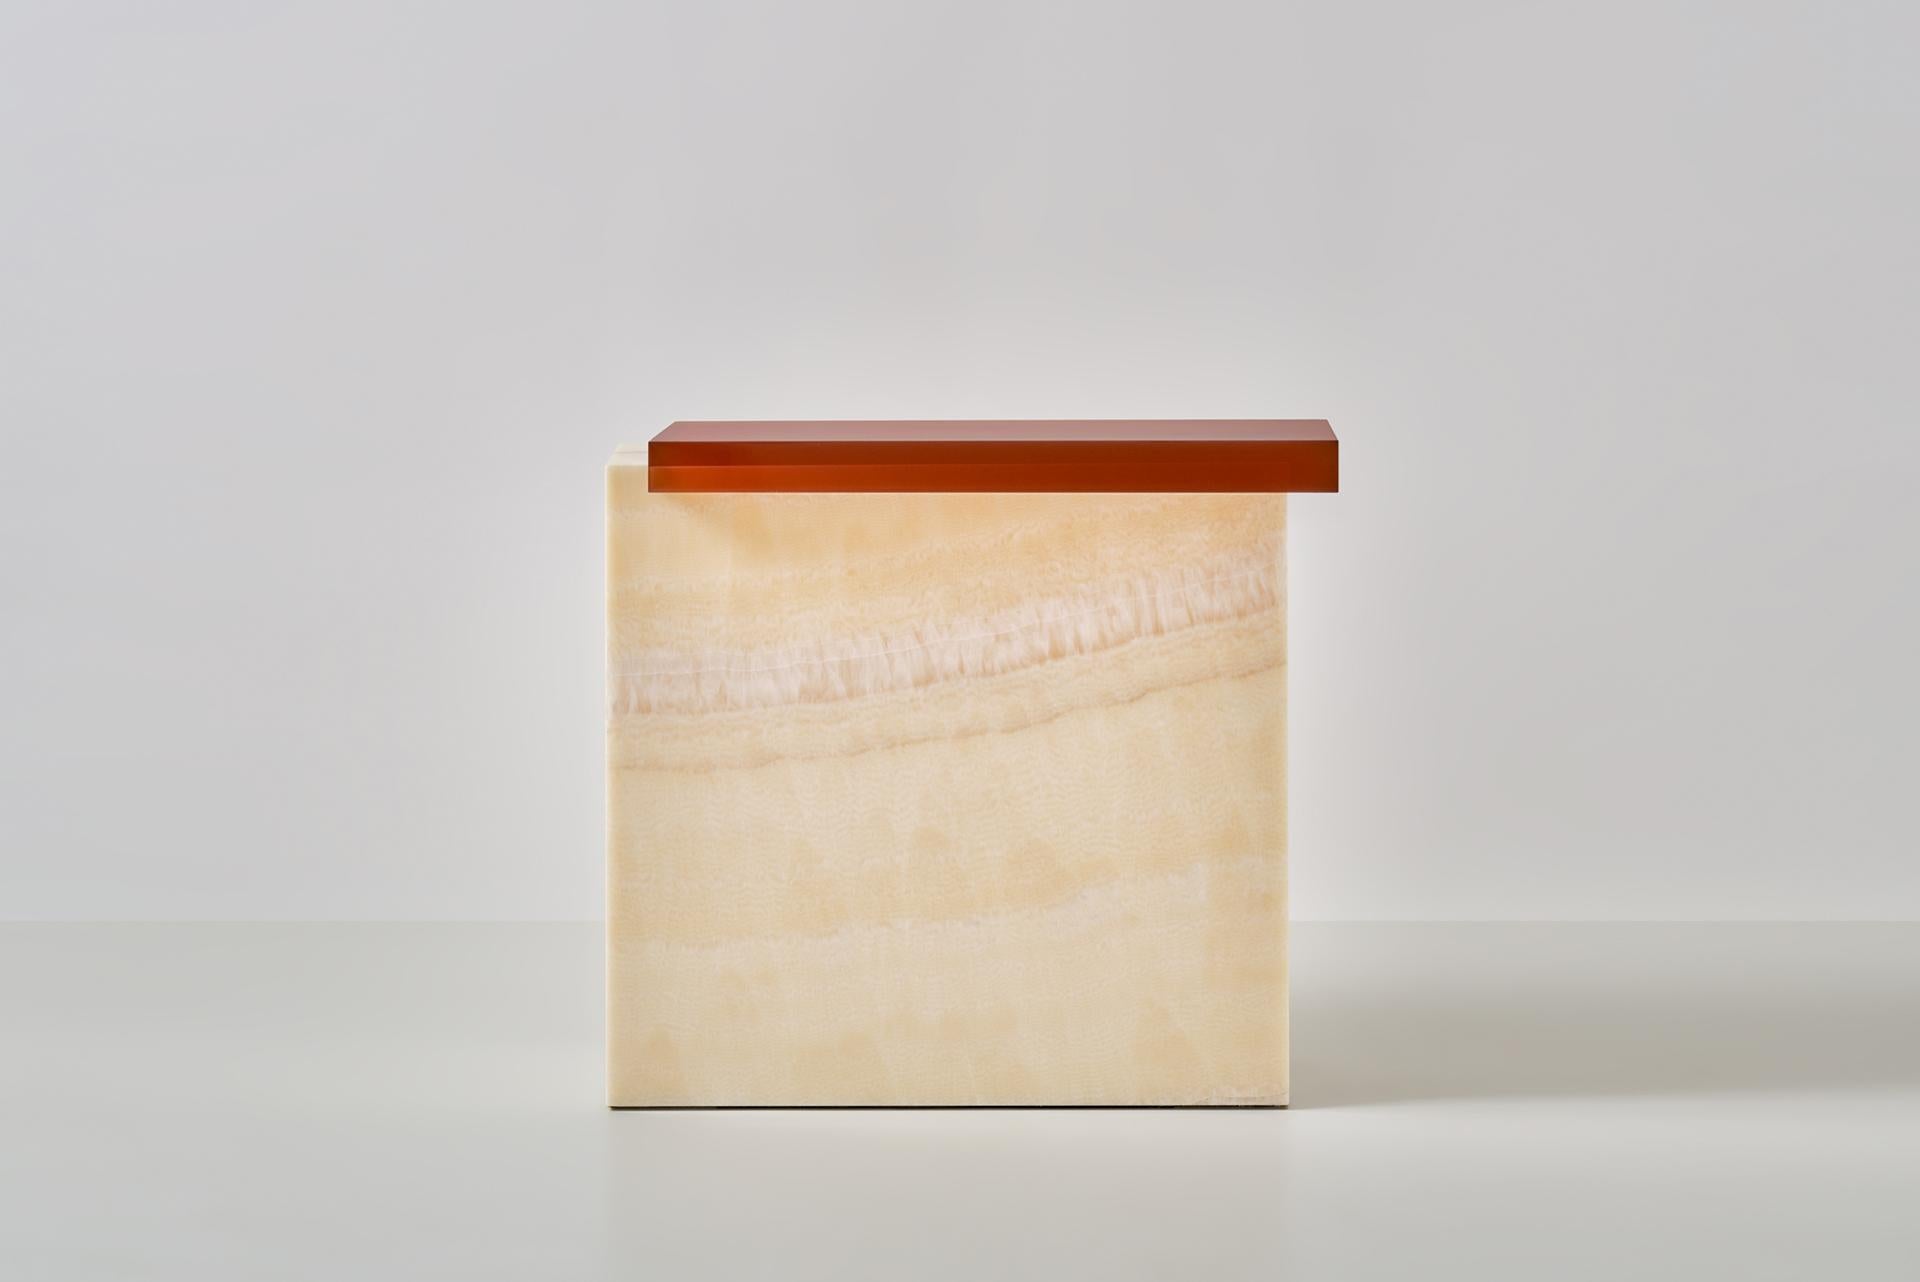 Sabine Marcelis
Console From “Stacked Collection” 
Netherlands, 2023
Resin and Sunrise Delight Onyx.
Measurements 108 x 45 x 100 h cm 42,5 x 17,7 x 39,4 h in
Exclusive for SIDE Gallery
Fairs PAD London 2023; Design Miami 2023